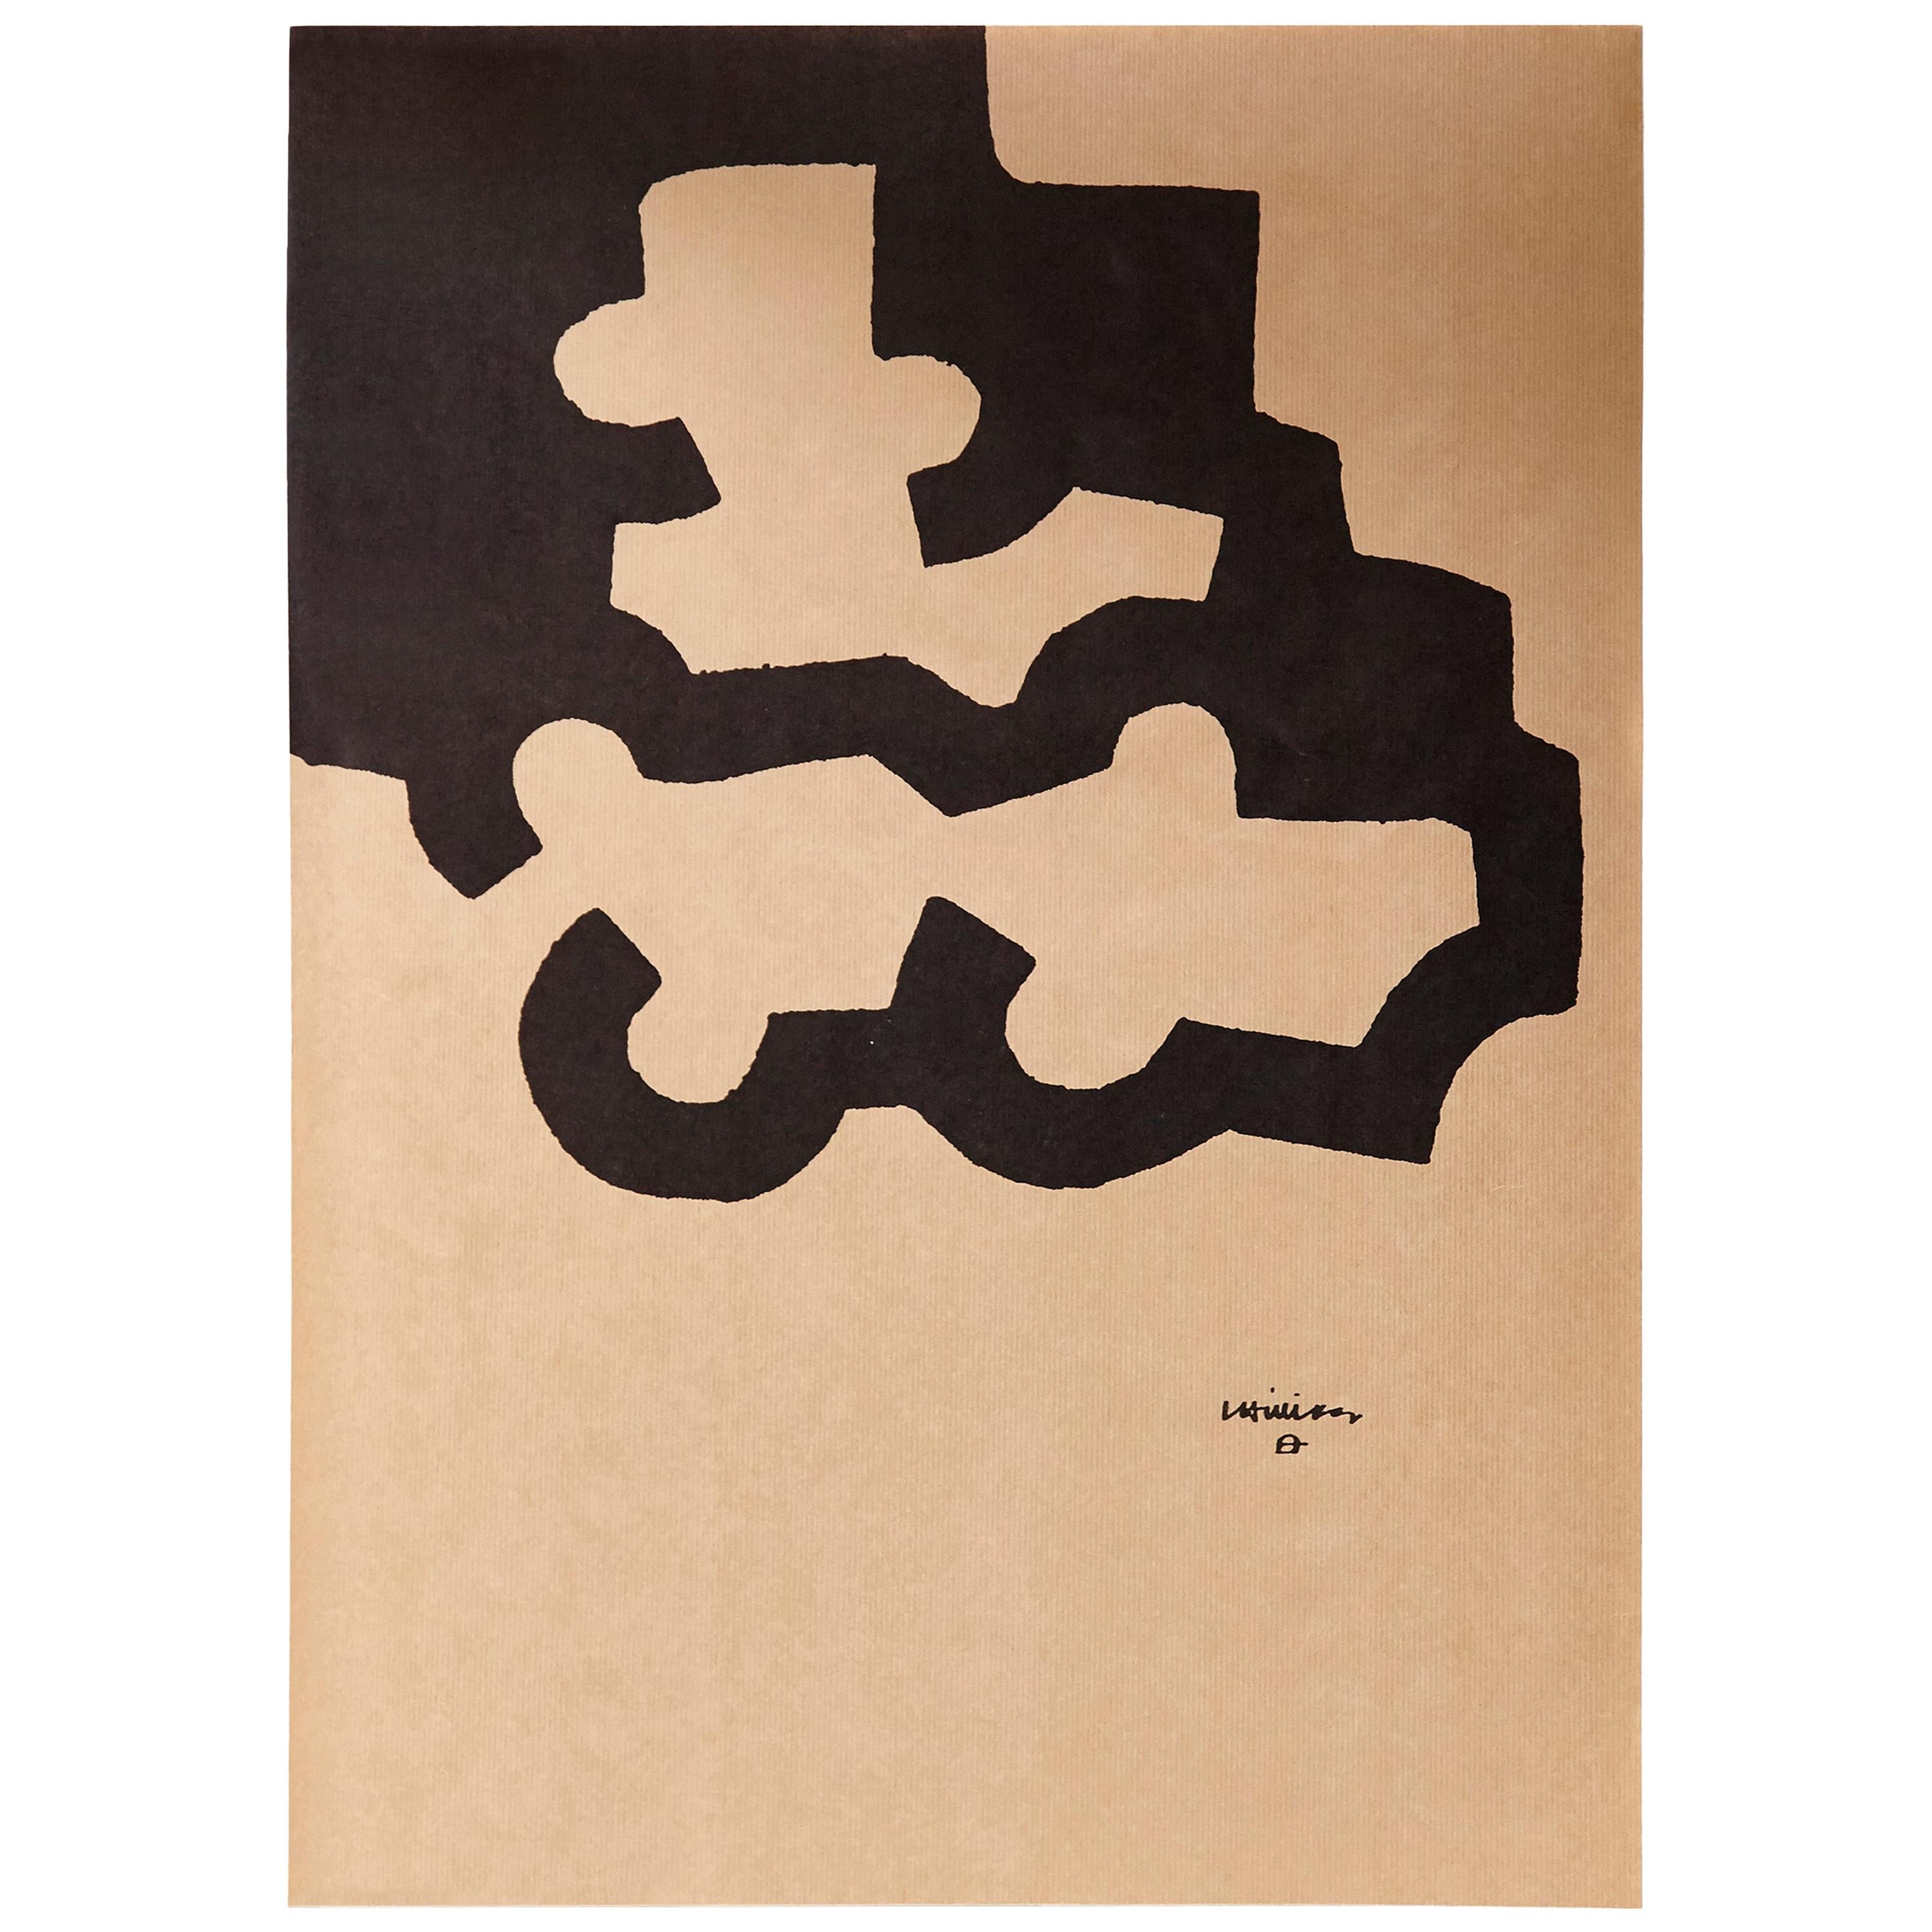 Eduardo Chillida Abstract Craft Paper Lithography "Untitled"